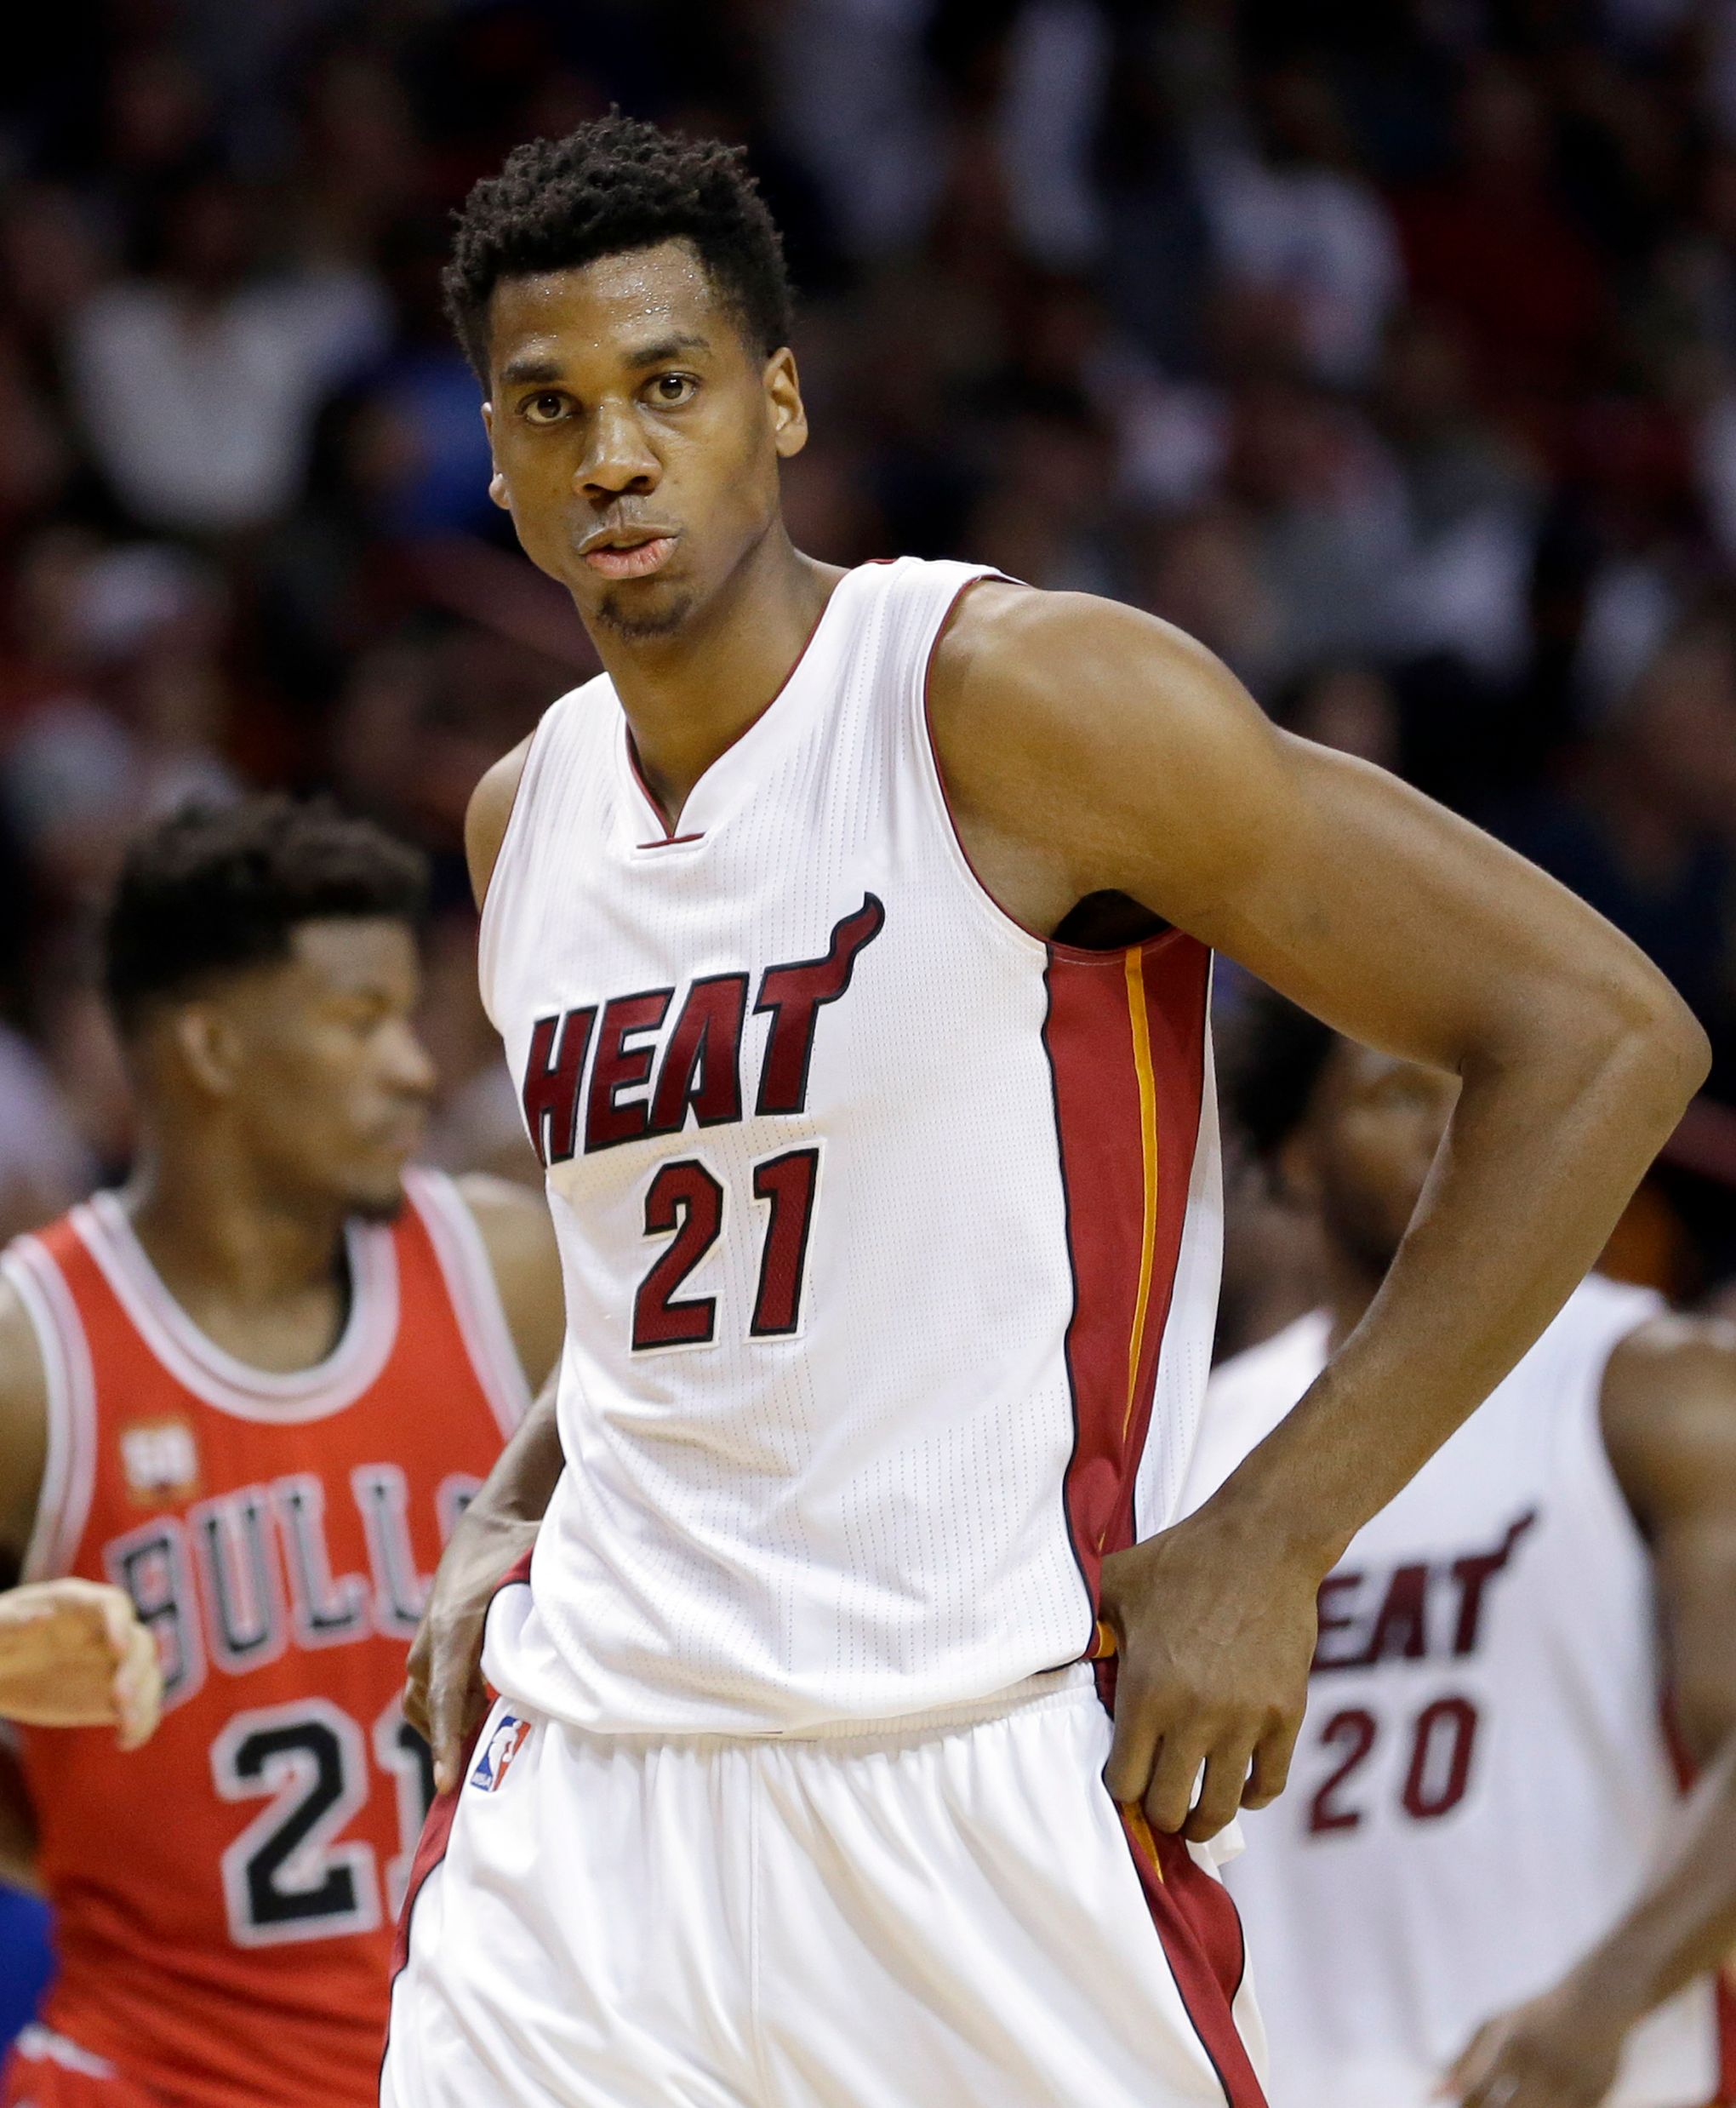 Hassan Whiteside Announces He's Staying in Miami - The New York Times